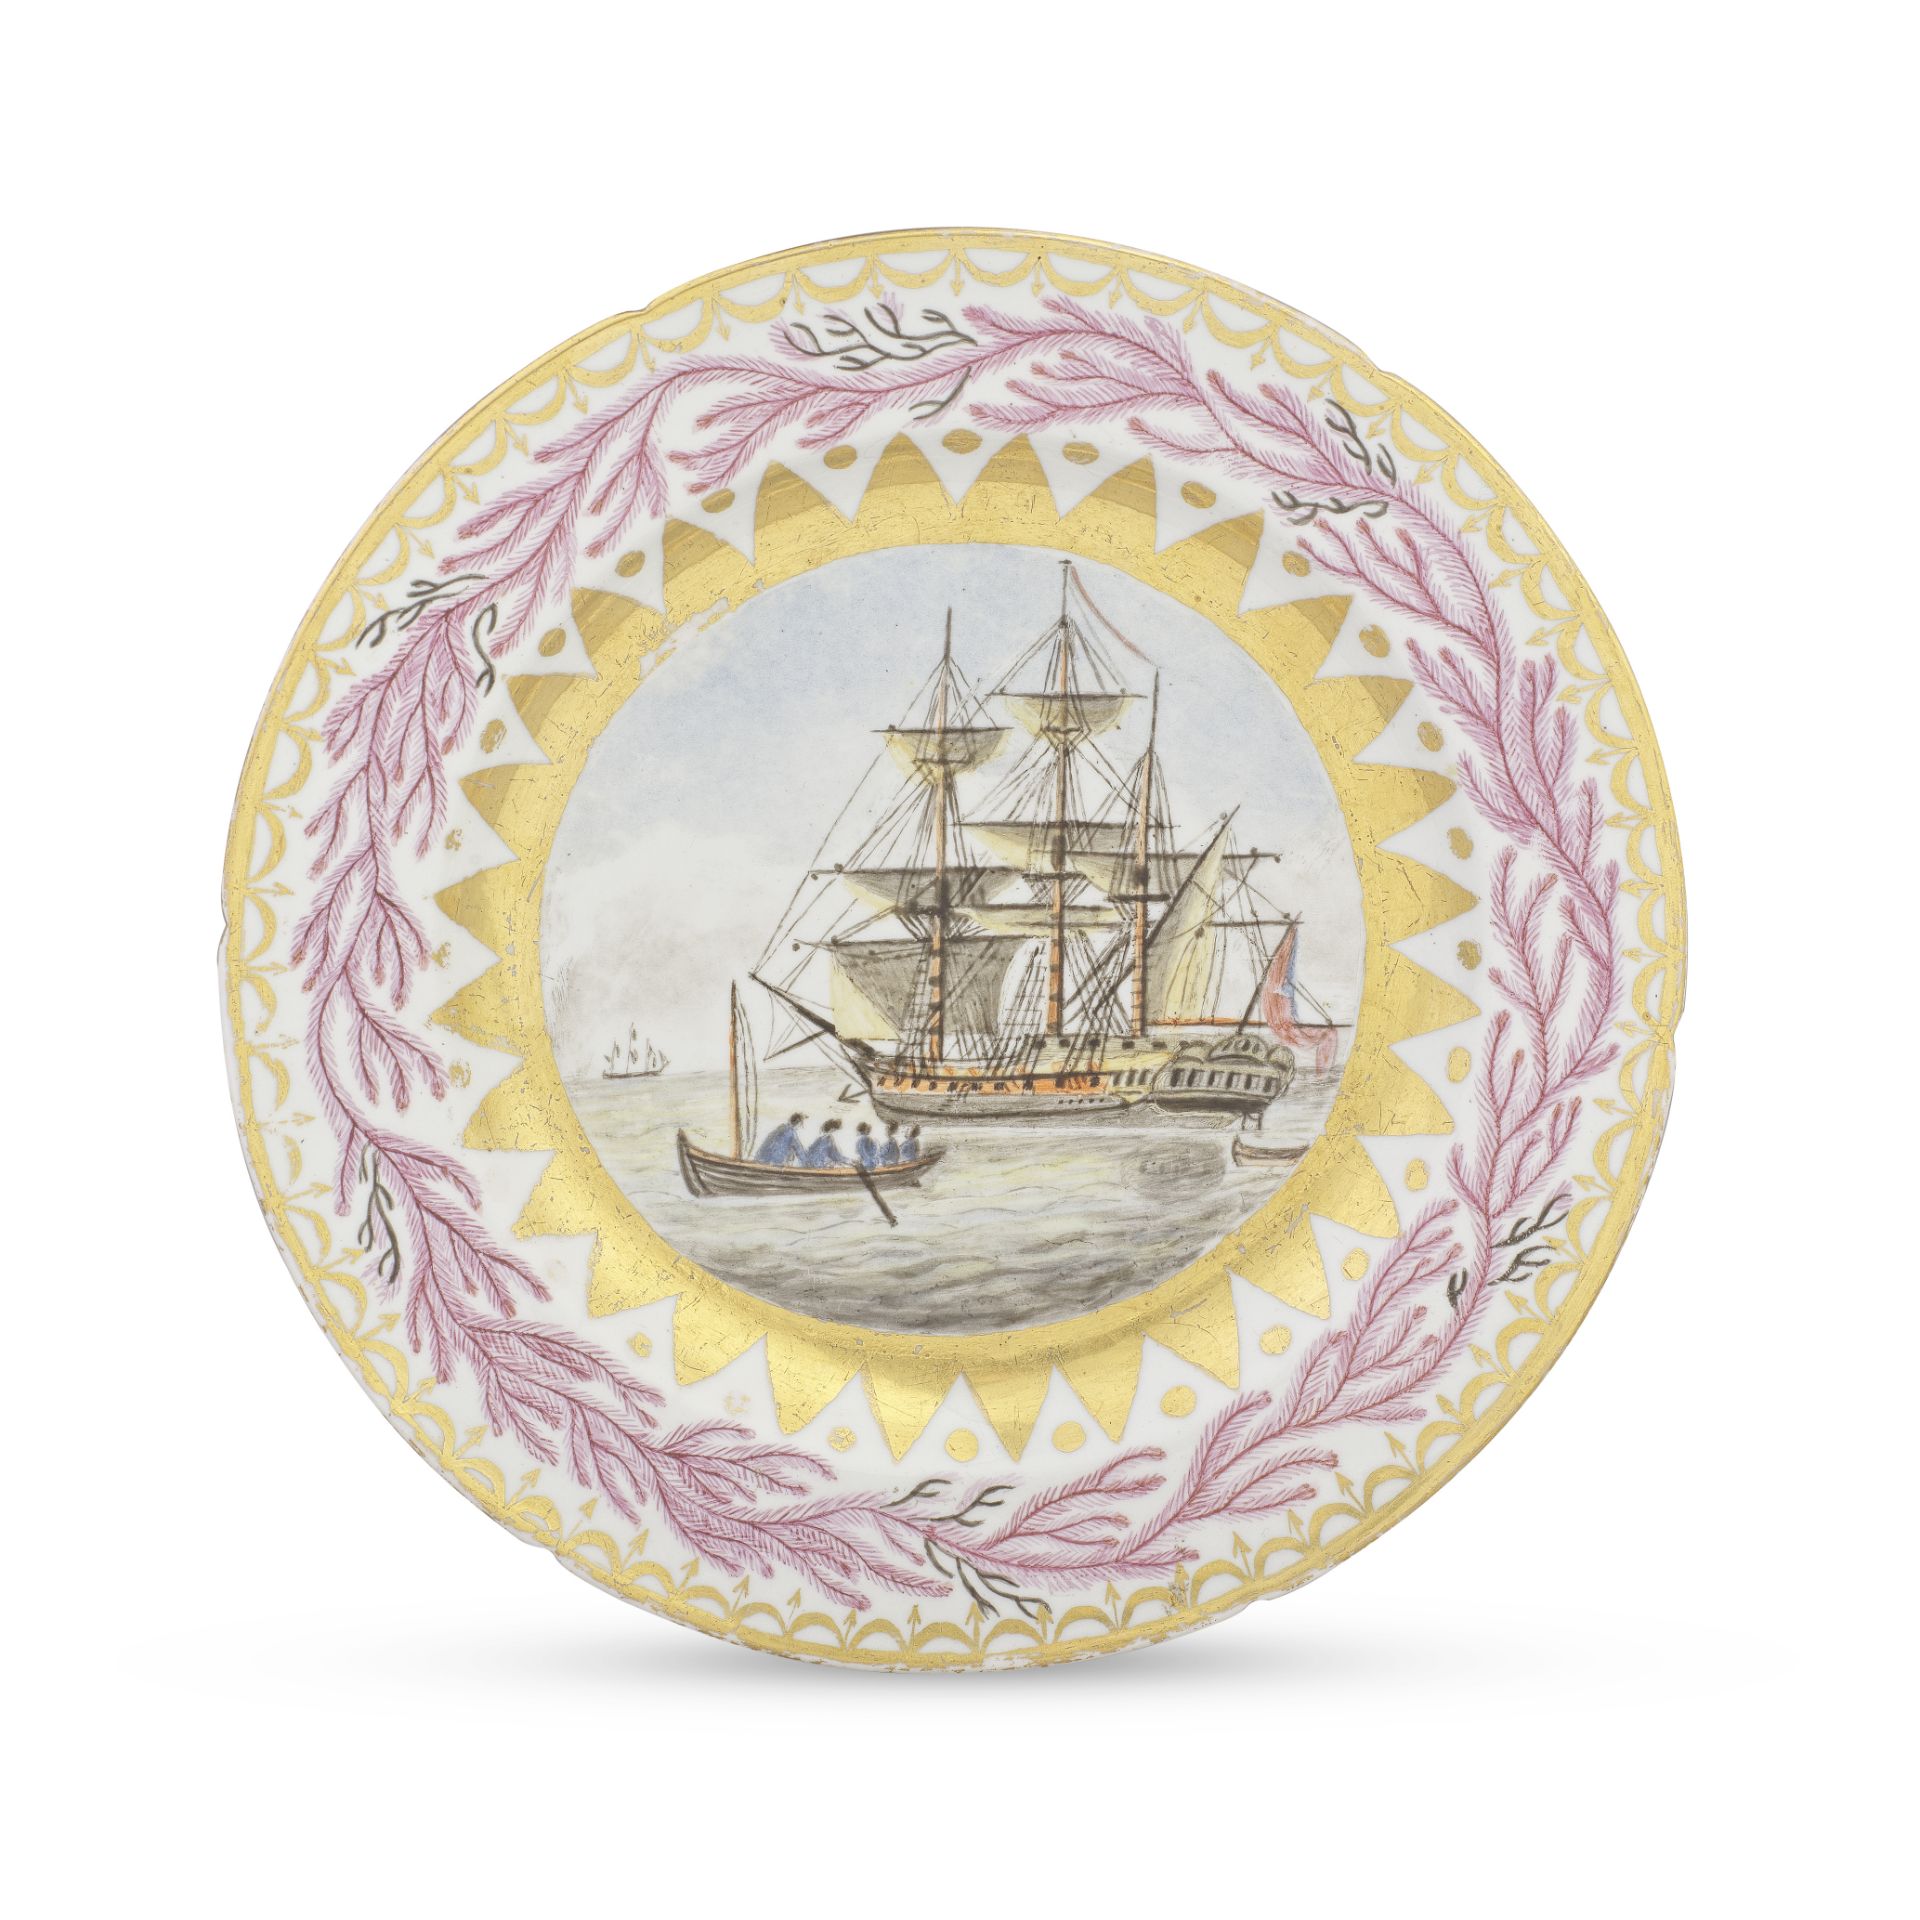 An independently-decorated Coalport cabinet plate, dated 1805